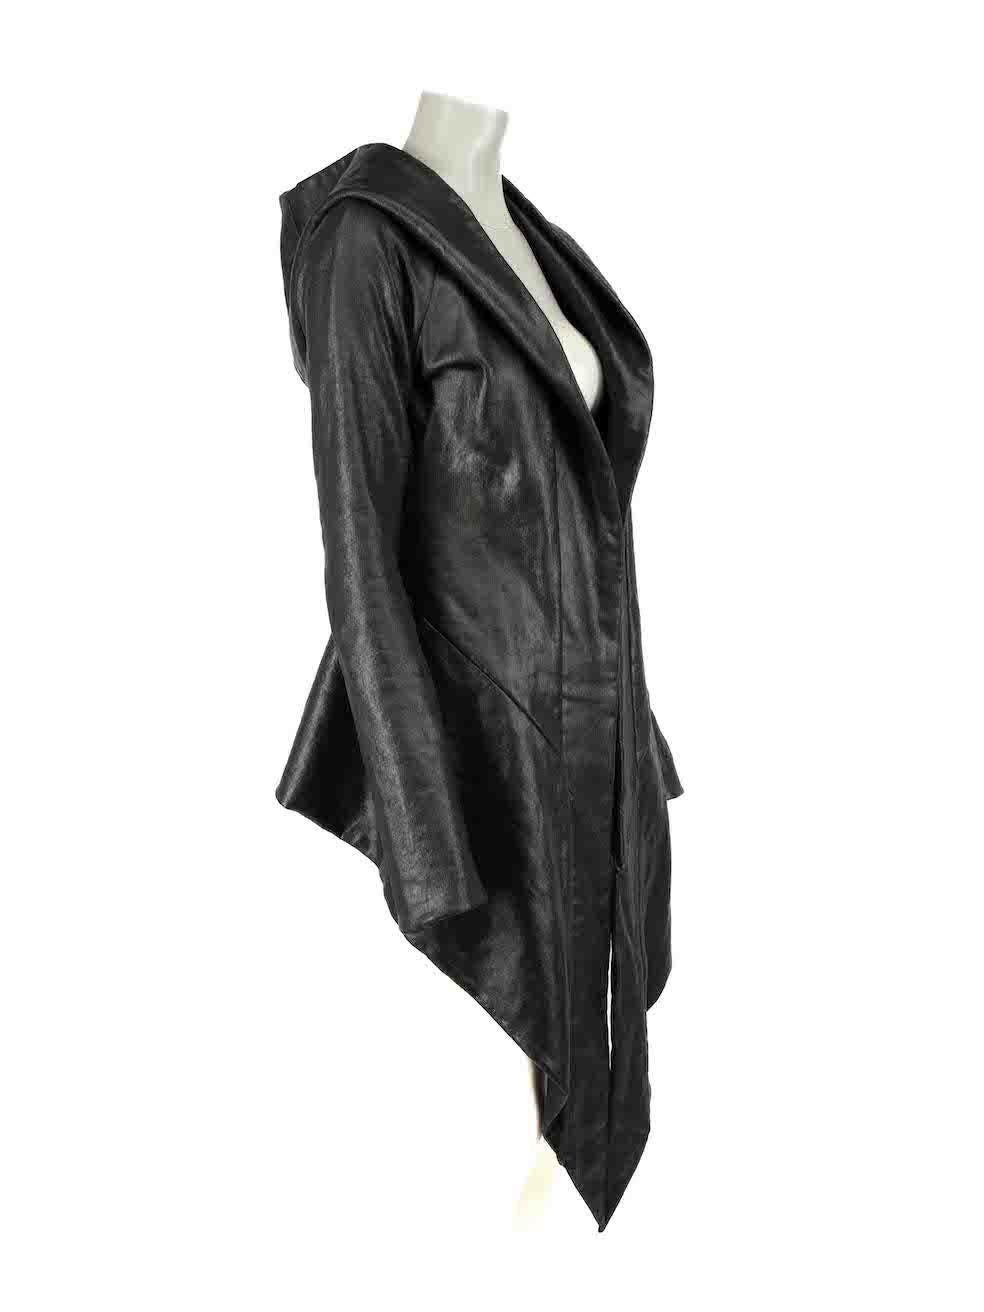 CONDITION is Very good. Hardly any visible wear to coat is evident on this used Gareth Pugh designer resale item.
 
 Details
 Black
 Coated cotton
 Coat
 Open front
 Hood
 Asymmetric hem
 
 
 Made in Italy
 
 Composition
 100% Cotton
 
 Care